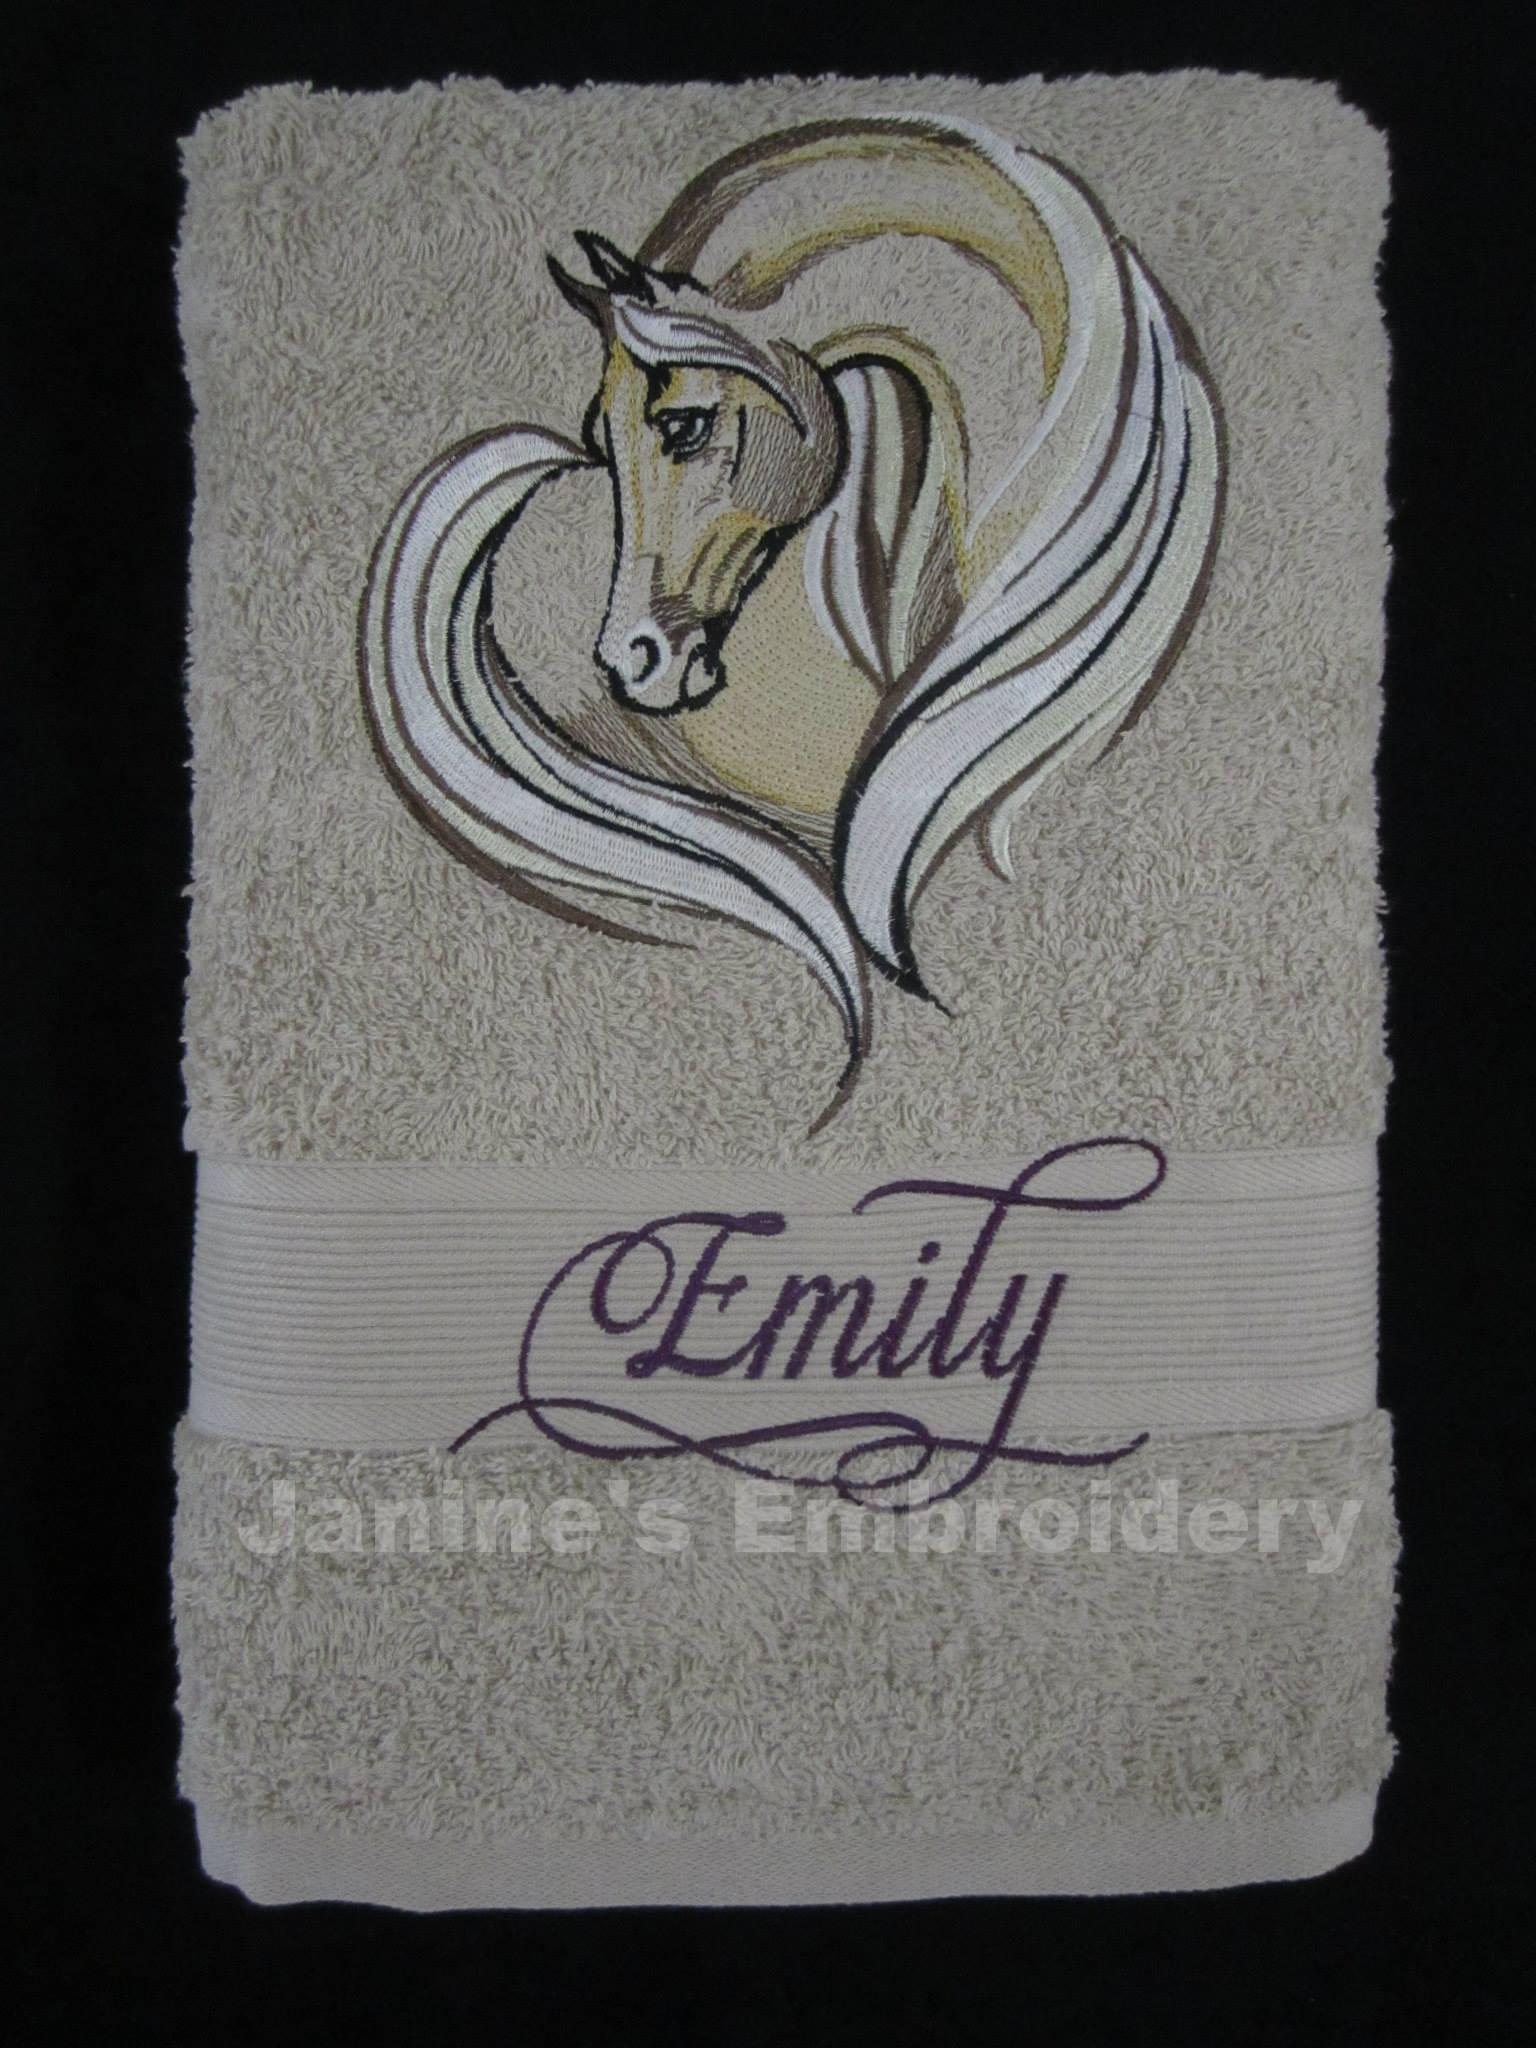 Bathroom towel with Horse heart embroidery design